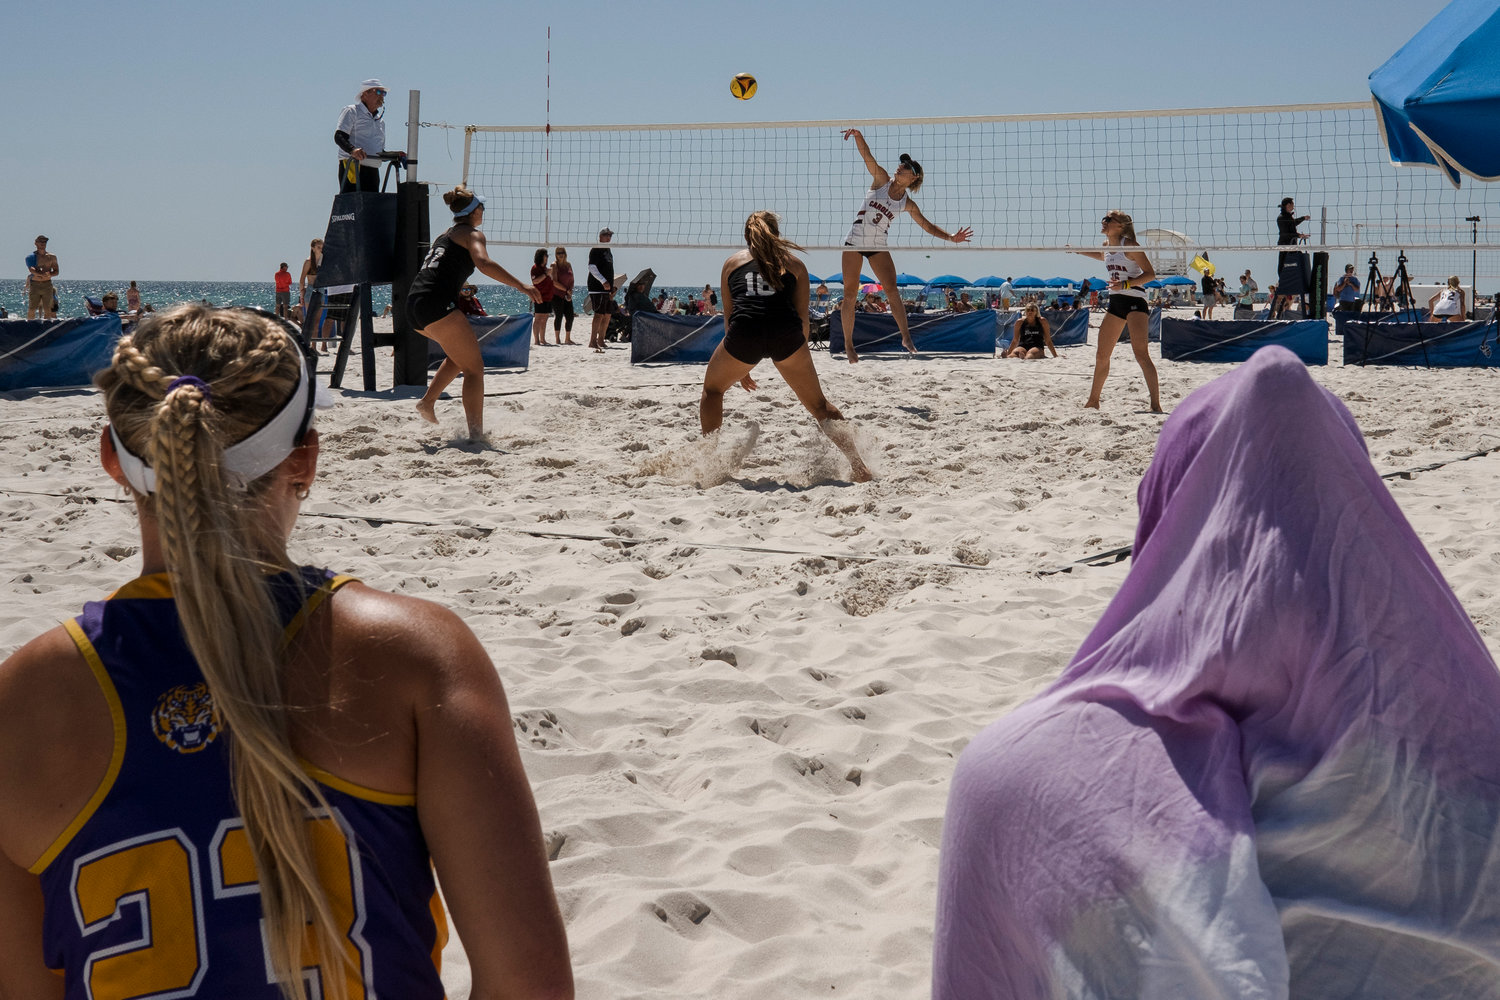 LSU players watch South Carolina and Tulane play a match during last year’s March to May tournament in Gulf Shores March 20, 2022. The white-sand beaches of the Alabama Gulf Coast will once again be filled with top collegiate beach volleyball squads this weekend during the fifth annual spring break tournament.